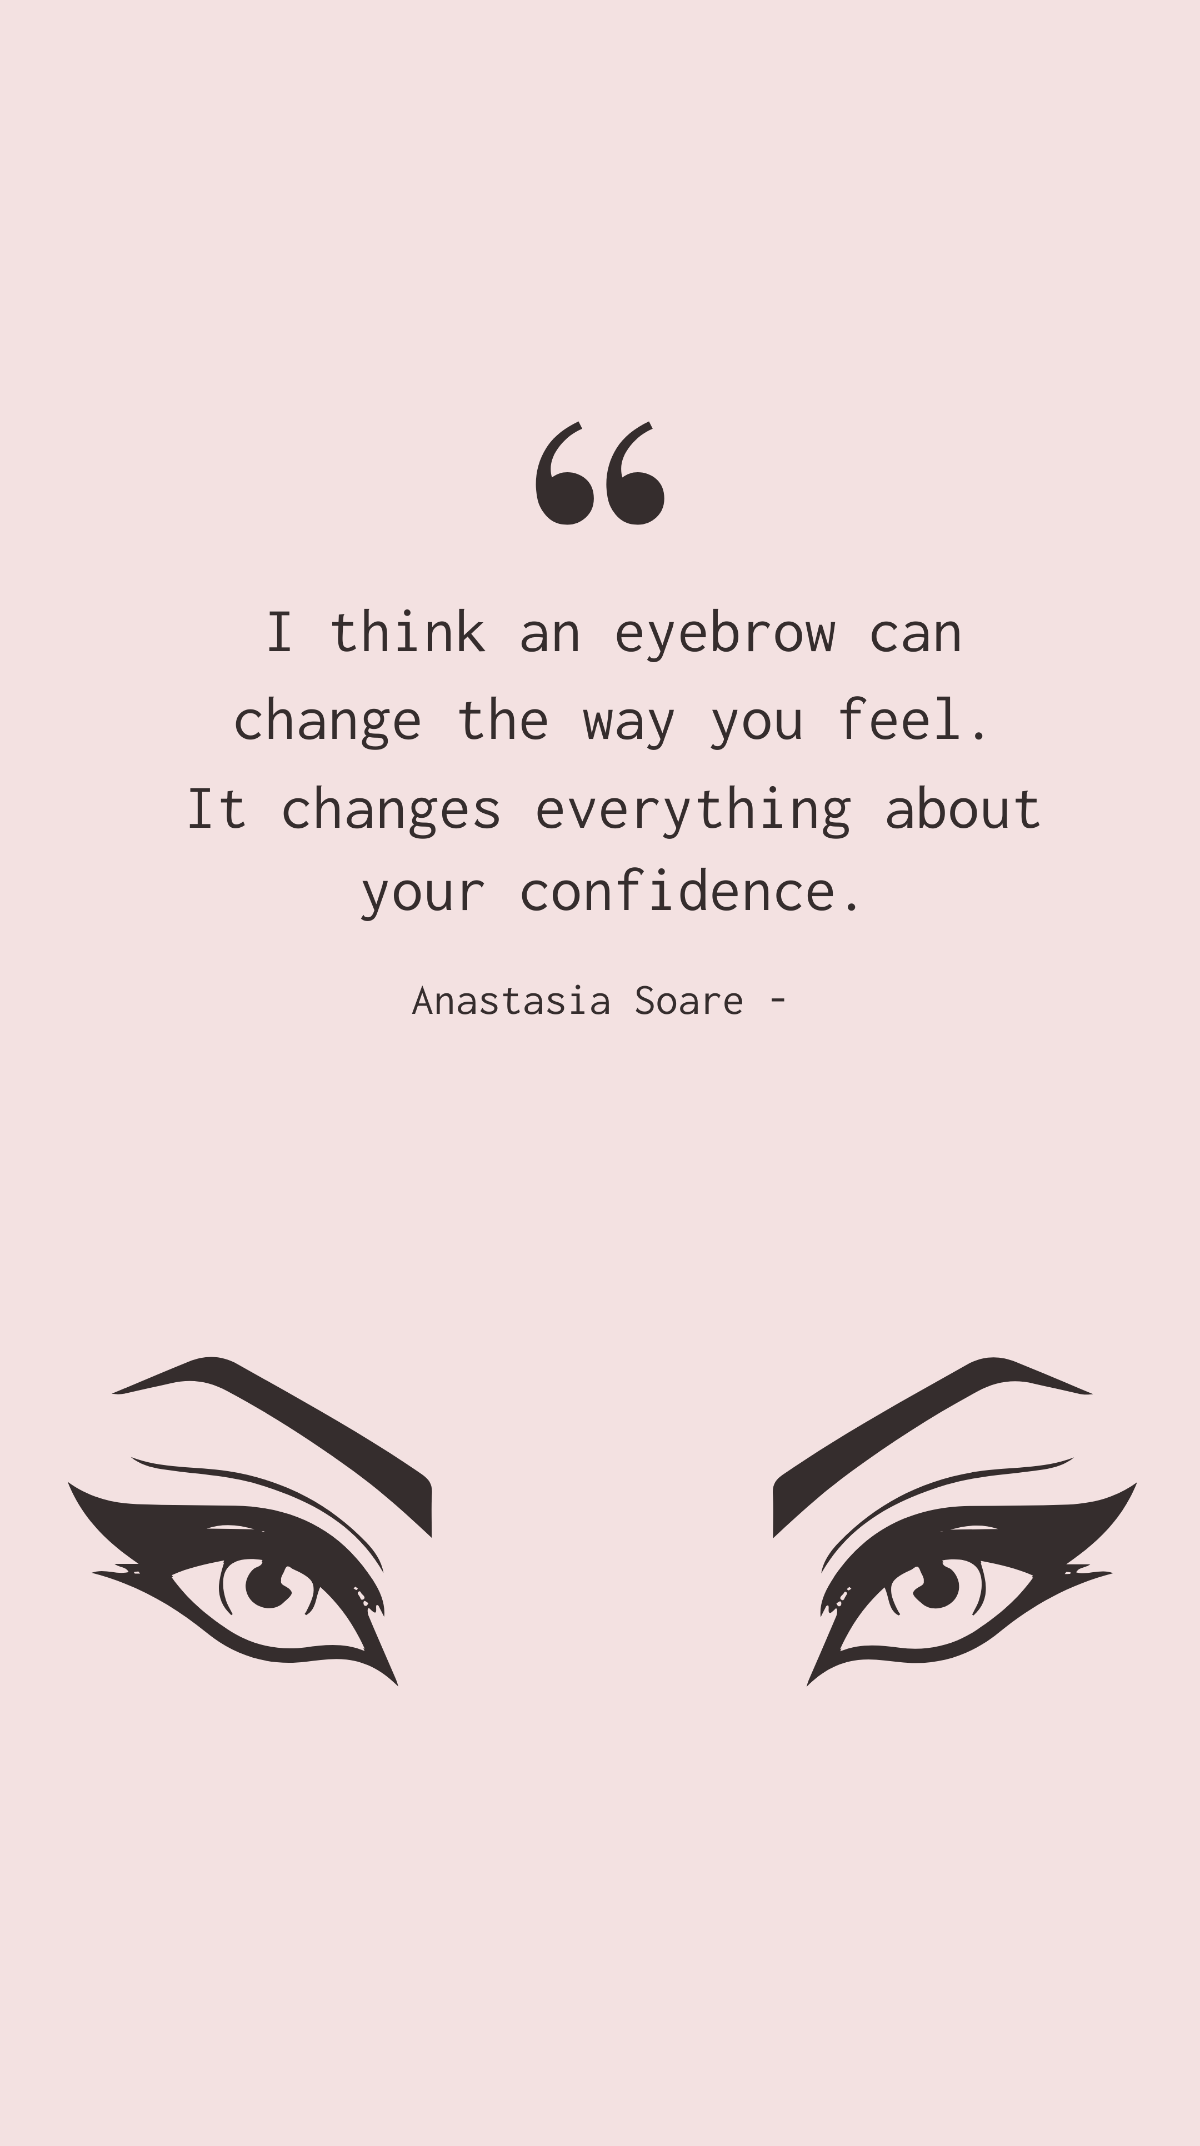 Anastasia Soare - I think an eyebrow can change the way you feel. It changes everything about your confidence.